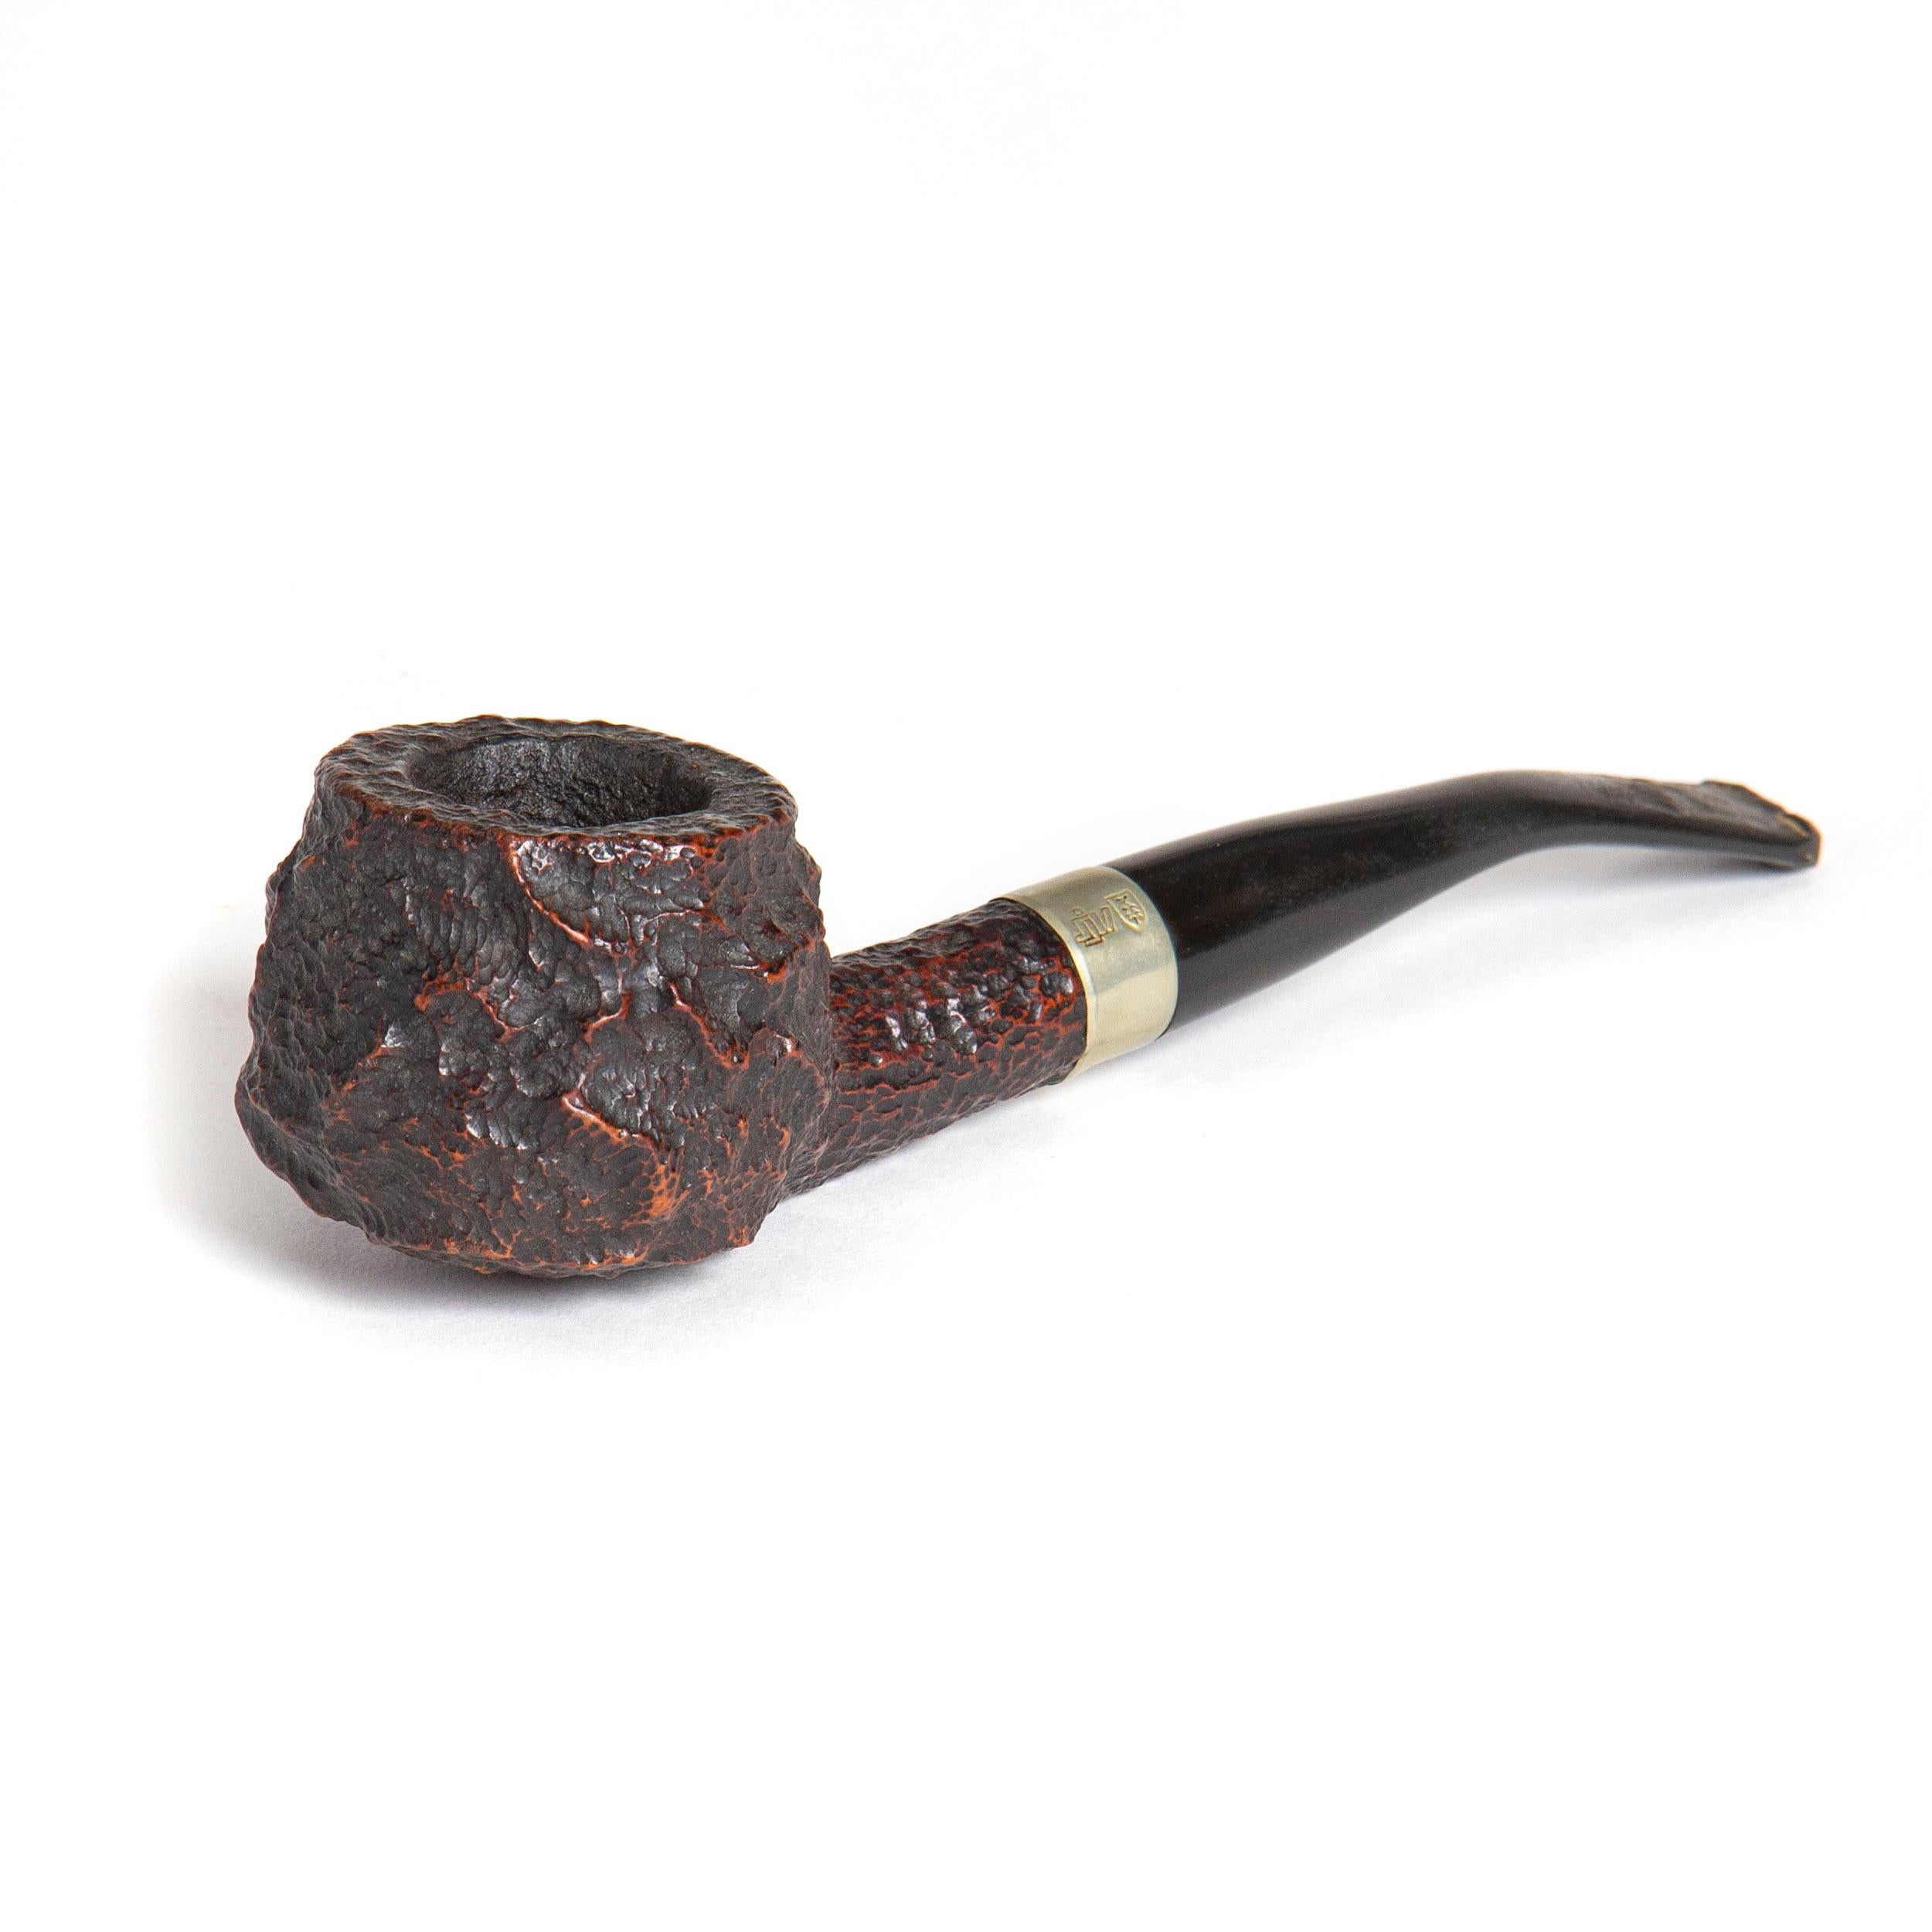 A hand carved wood smoking pipe, the handle circled by a silver band with etched decoration. Marked 